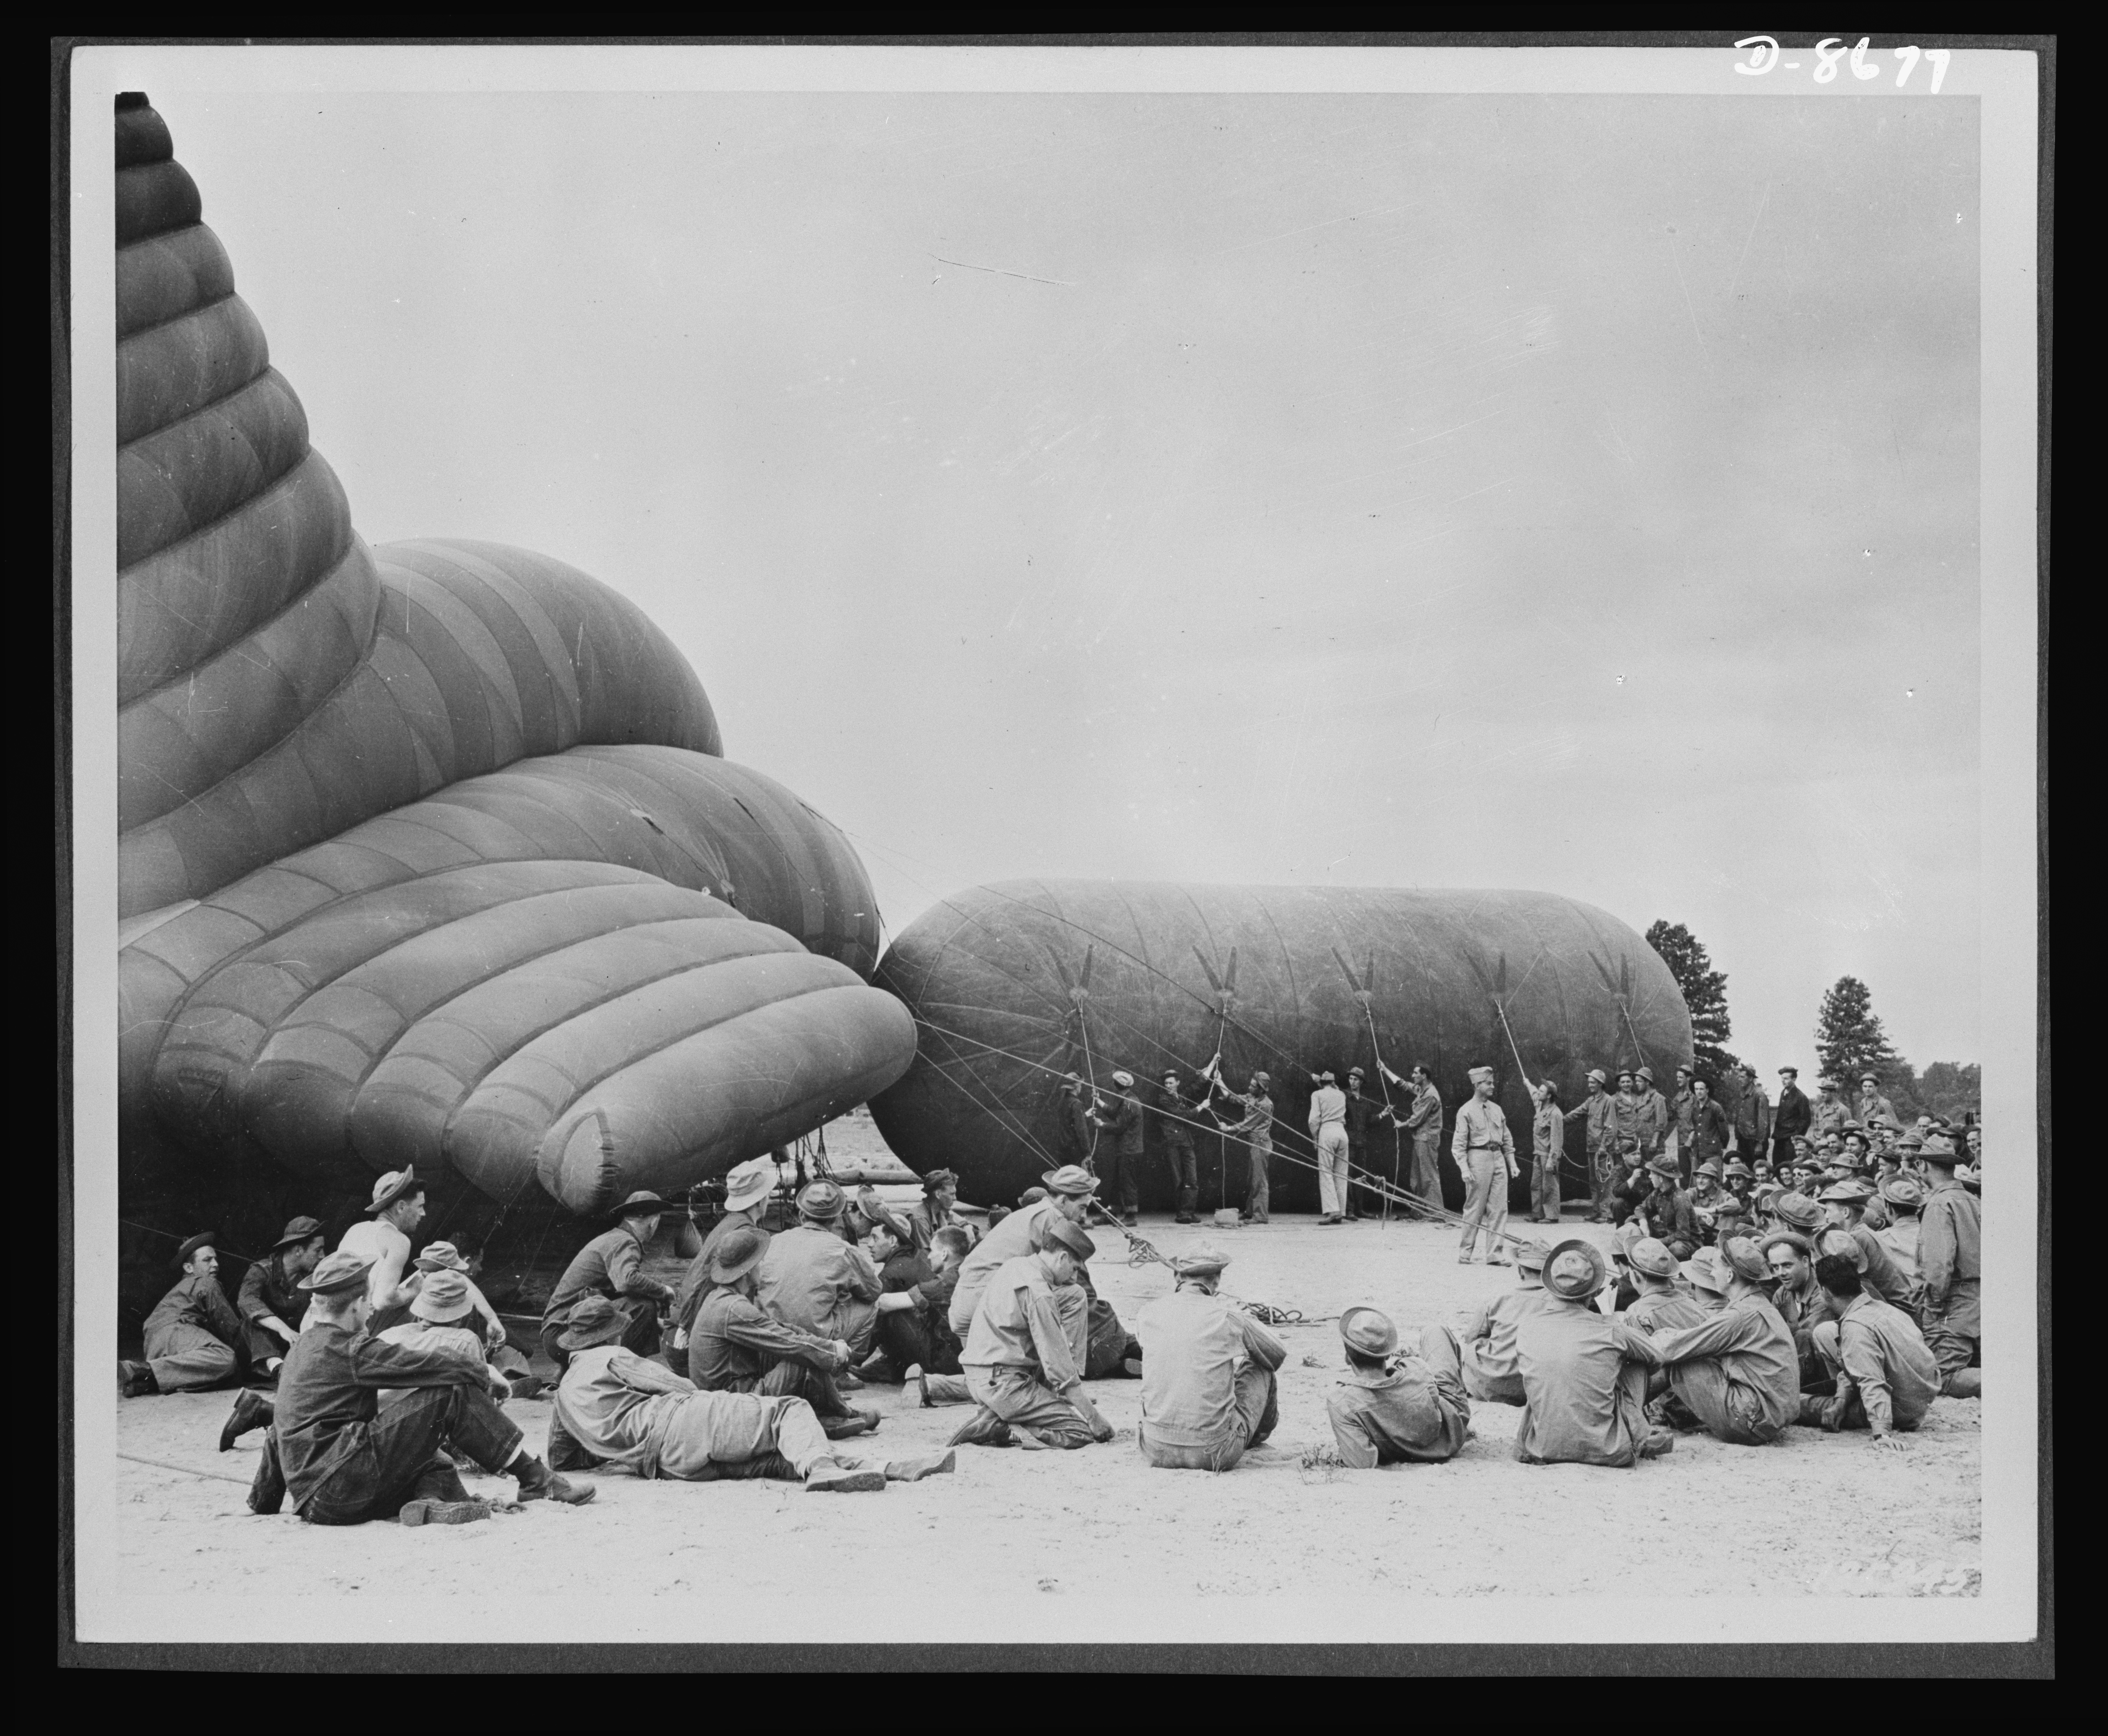 Barrage Balloon training in Camp Tyson, Tennessee. image: Library of Congress